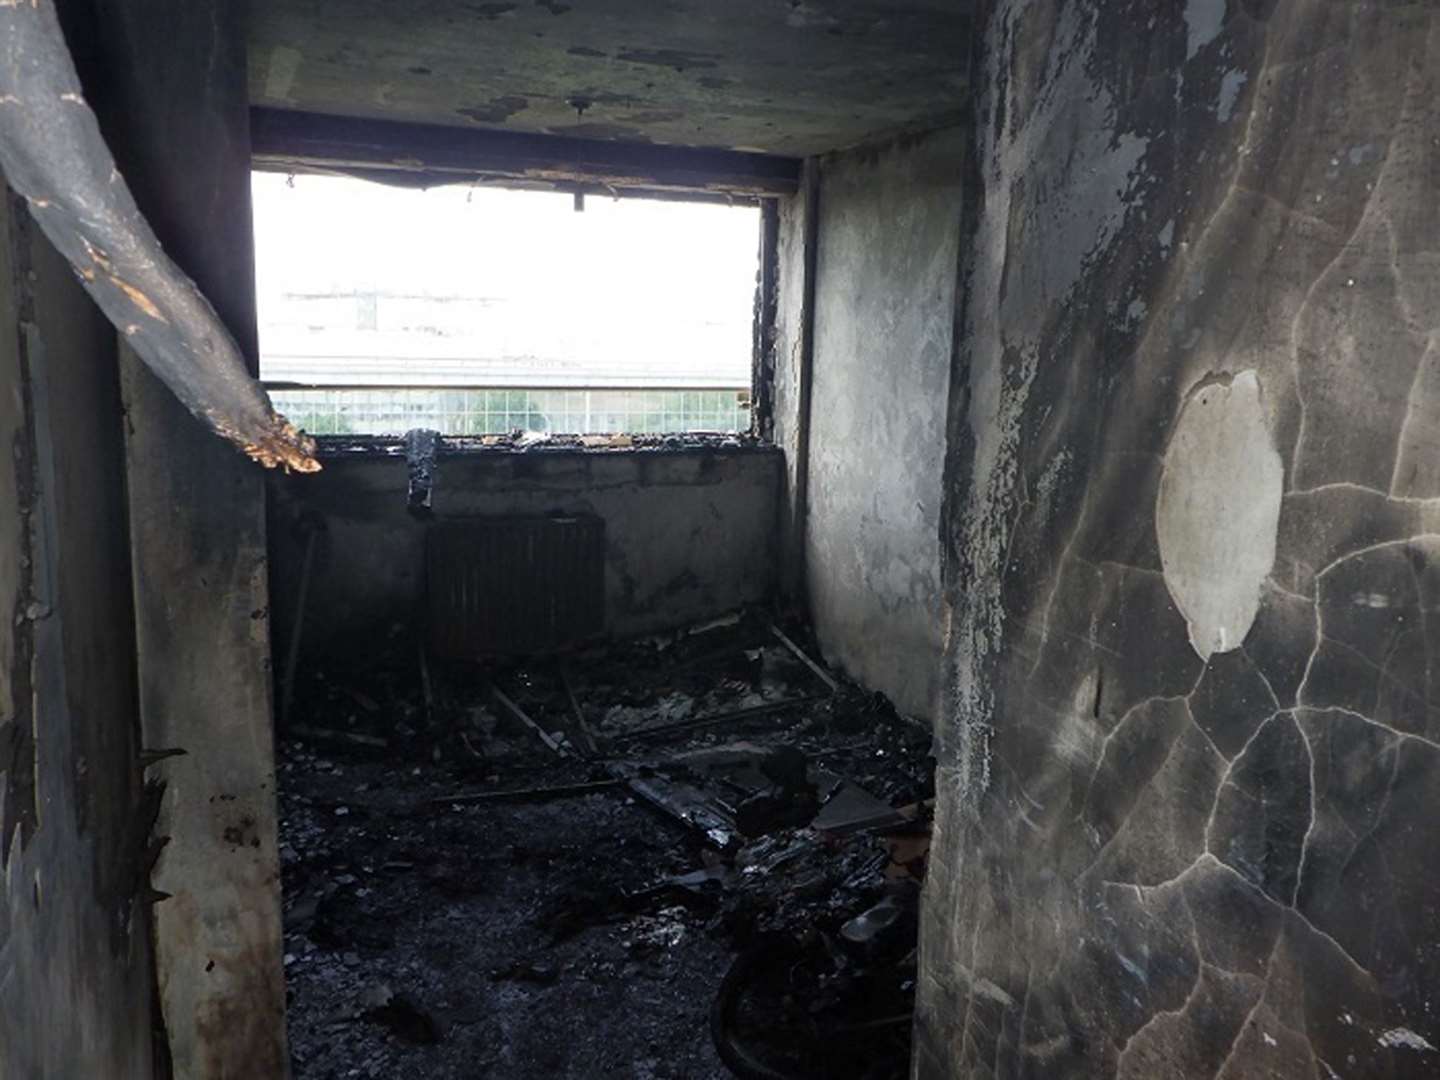 A picture taken from the twitter feed of @LondonFire showing the fire damage inside the flat. (LBF)